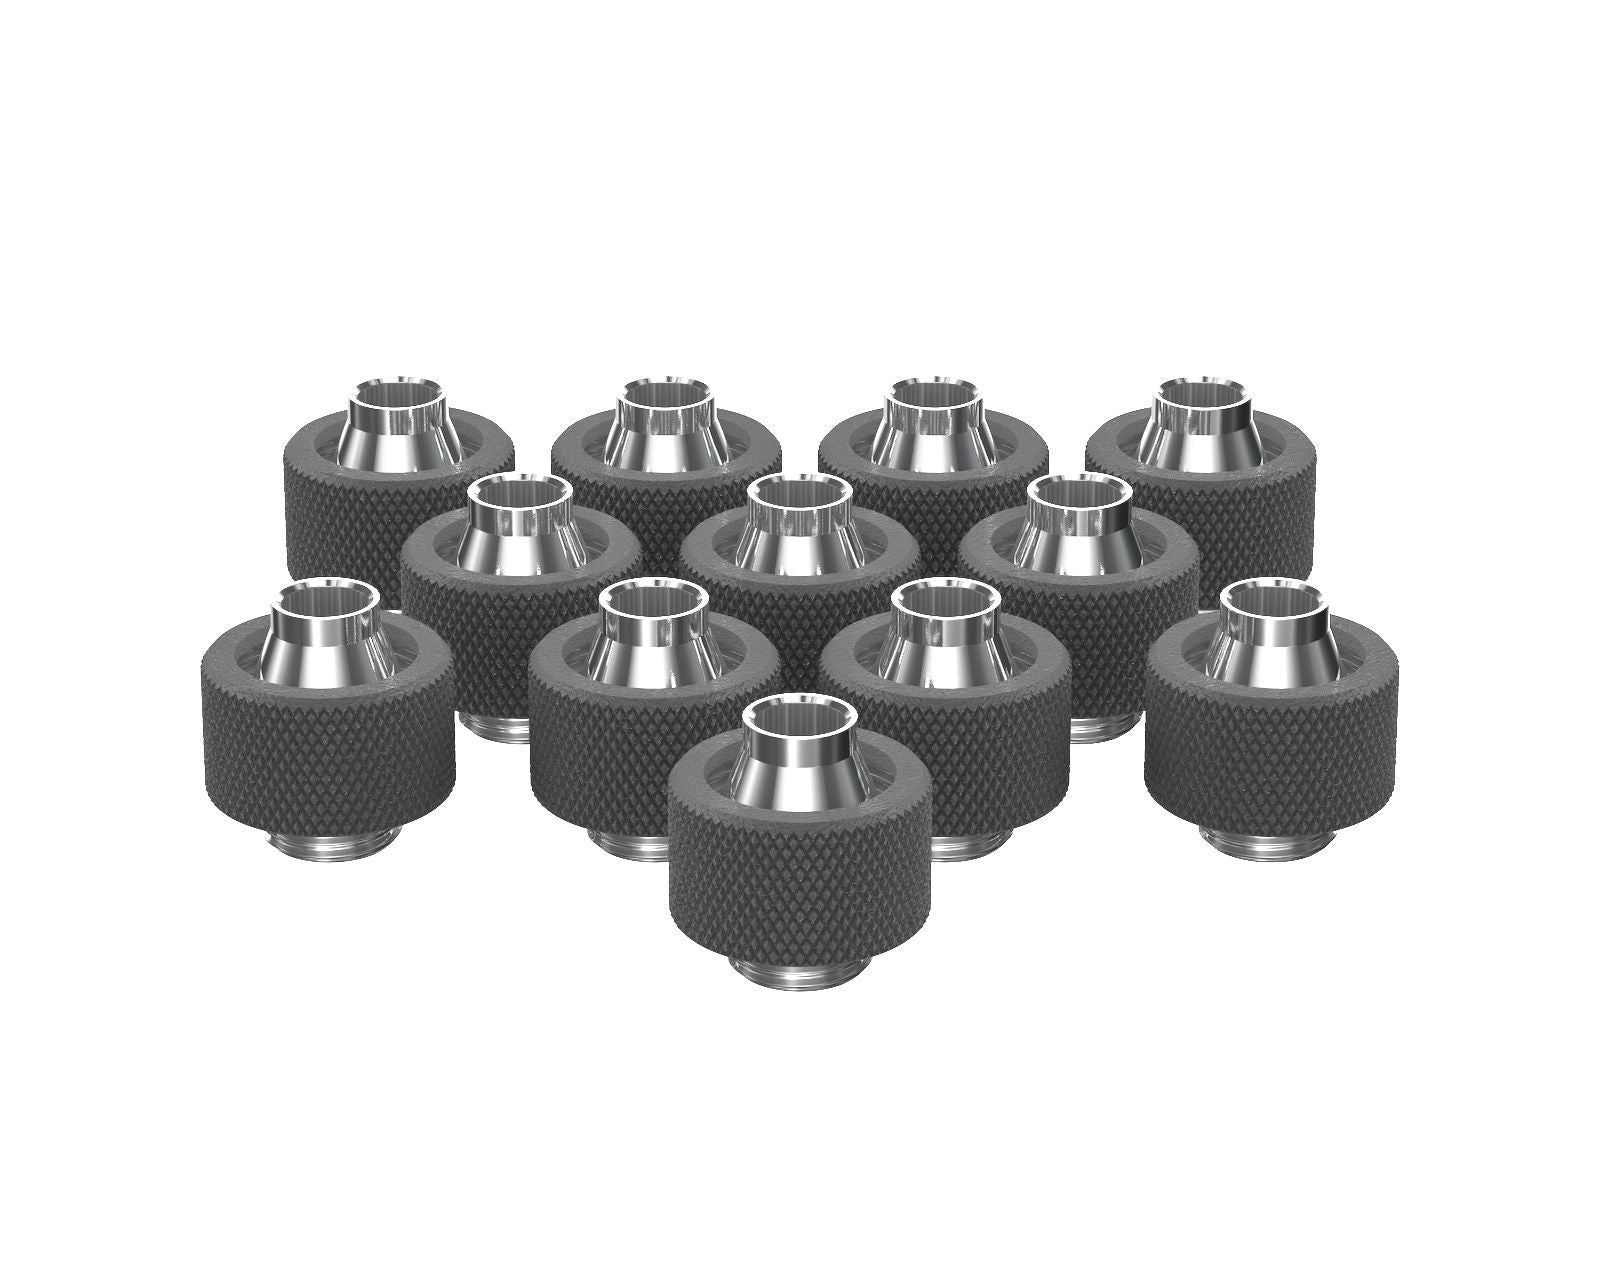 PrimoChill SecureFit SX - Premium Compression Fitting For 3/8in ID x 5/8in OD Flexible Tubing 12 Pack (F-SFSX58-12) - Available in 20+ Colors, Custom Watercooling Loop Ready - TX Matte Gun Metal